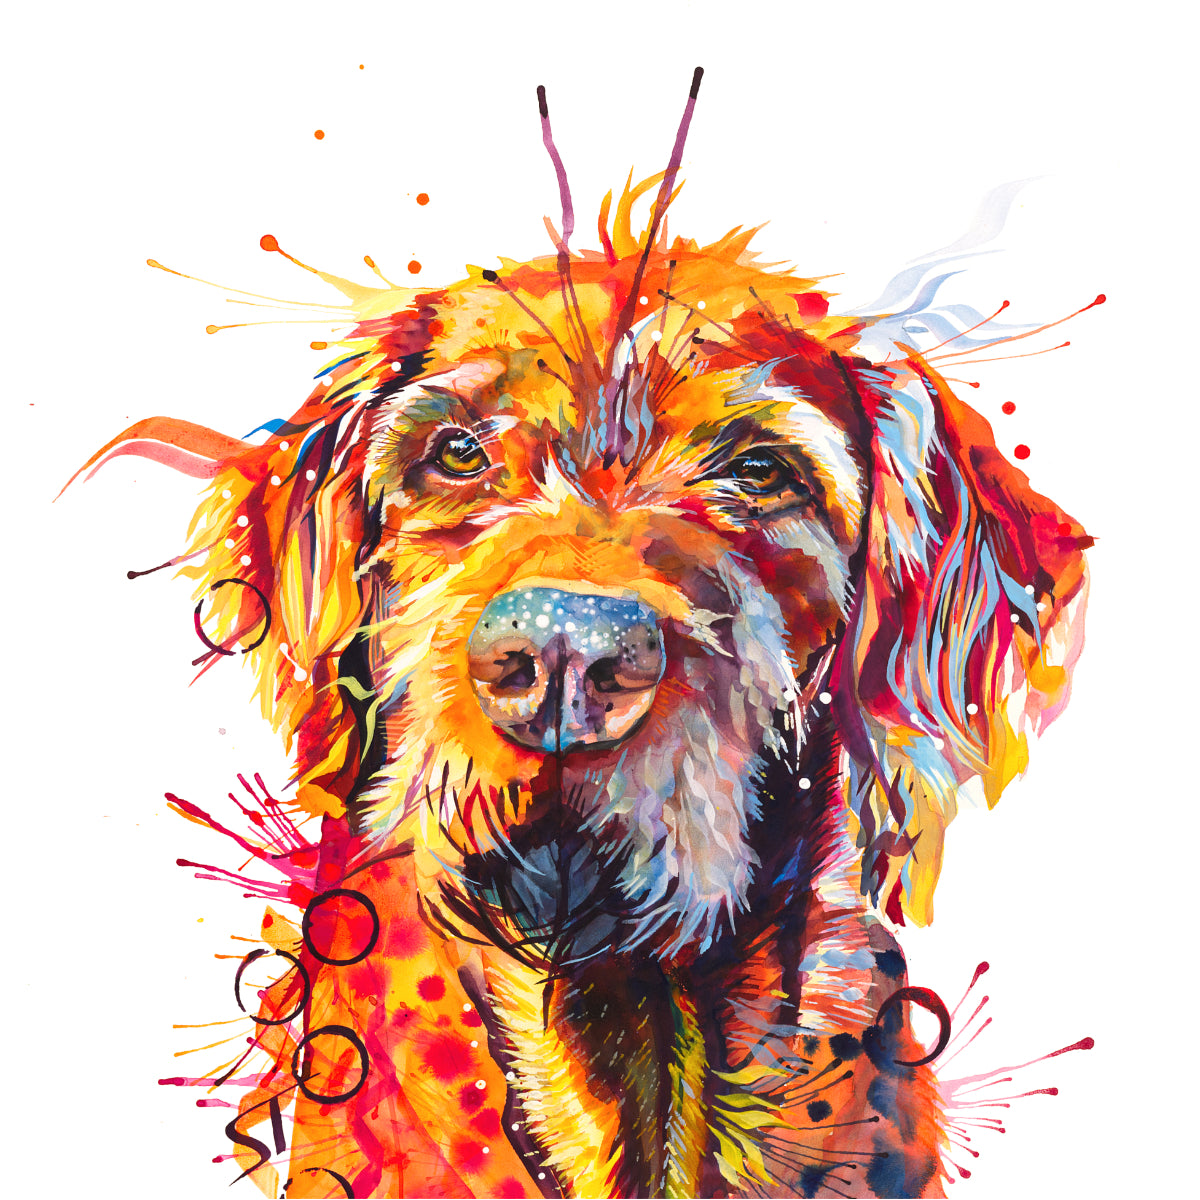 Hamish the Wirehaired Vizsla Framed Canvas